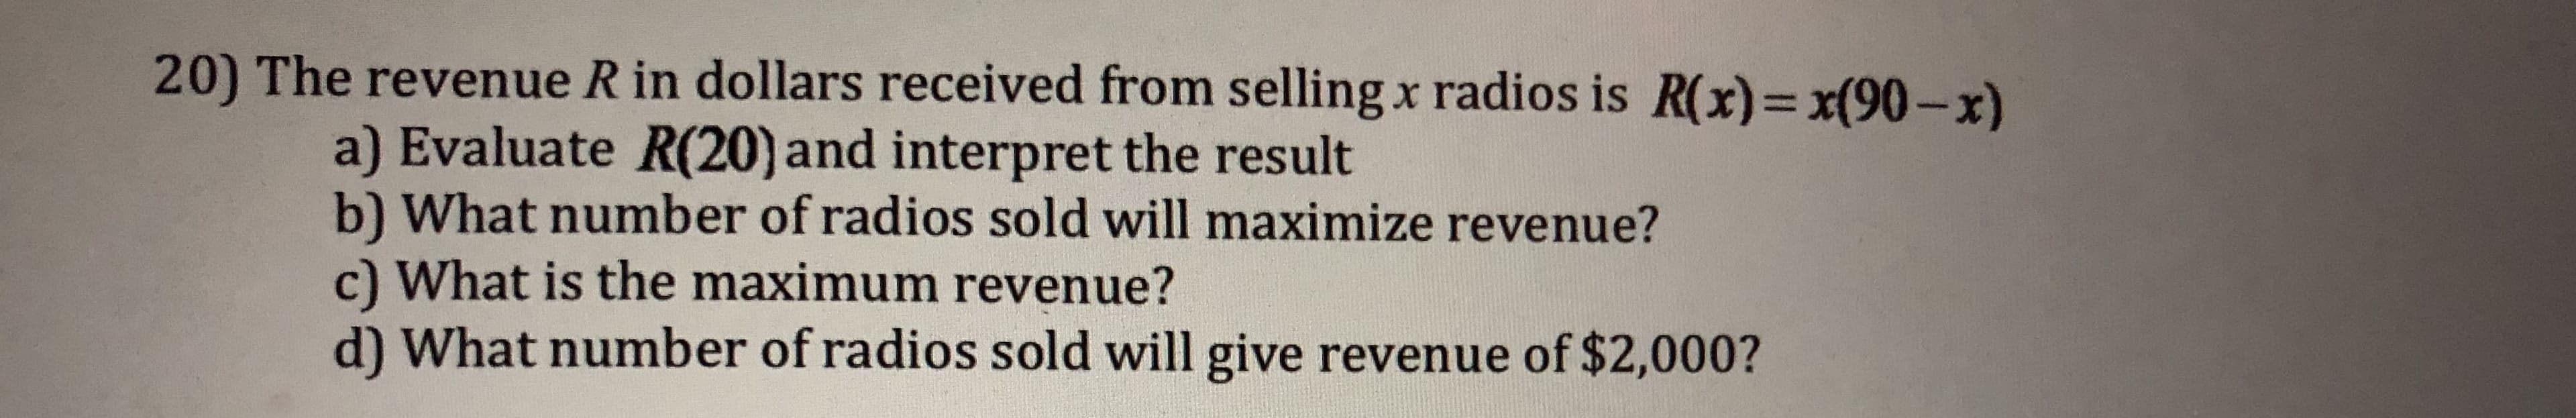 20) The revenue R in dollars received from selling x radios is R(x)-x(90-x)
a) Evaluate R(20) and interpret the result
b) What number of radios sold will maximize revenue?
c) What is the maximum revenue?
d) What number of radios sold will give revenue of $2,000?
